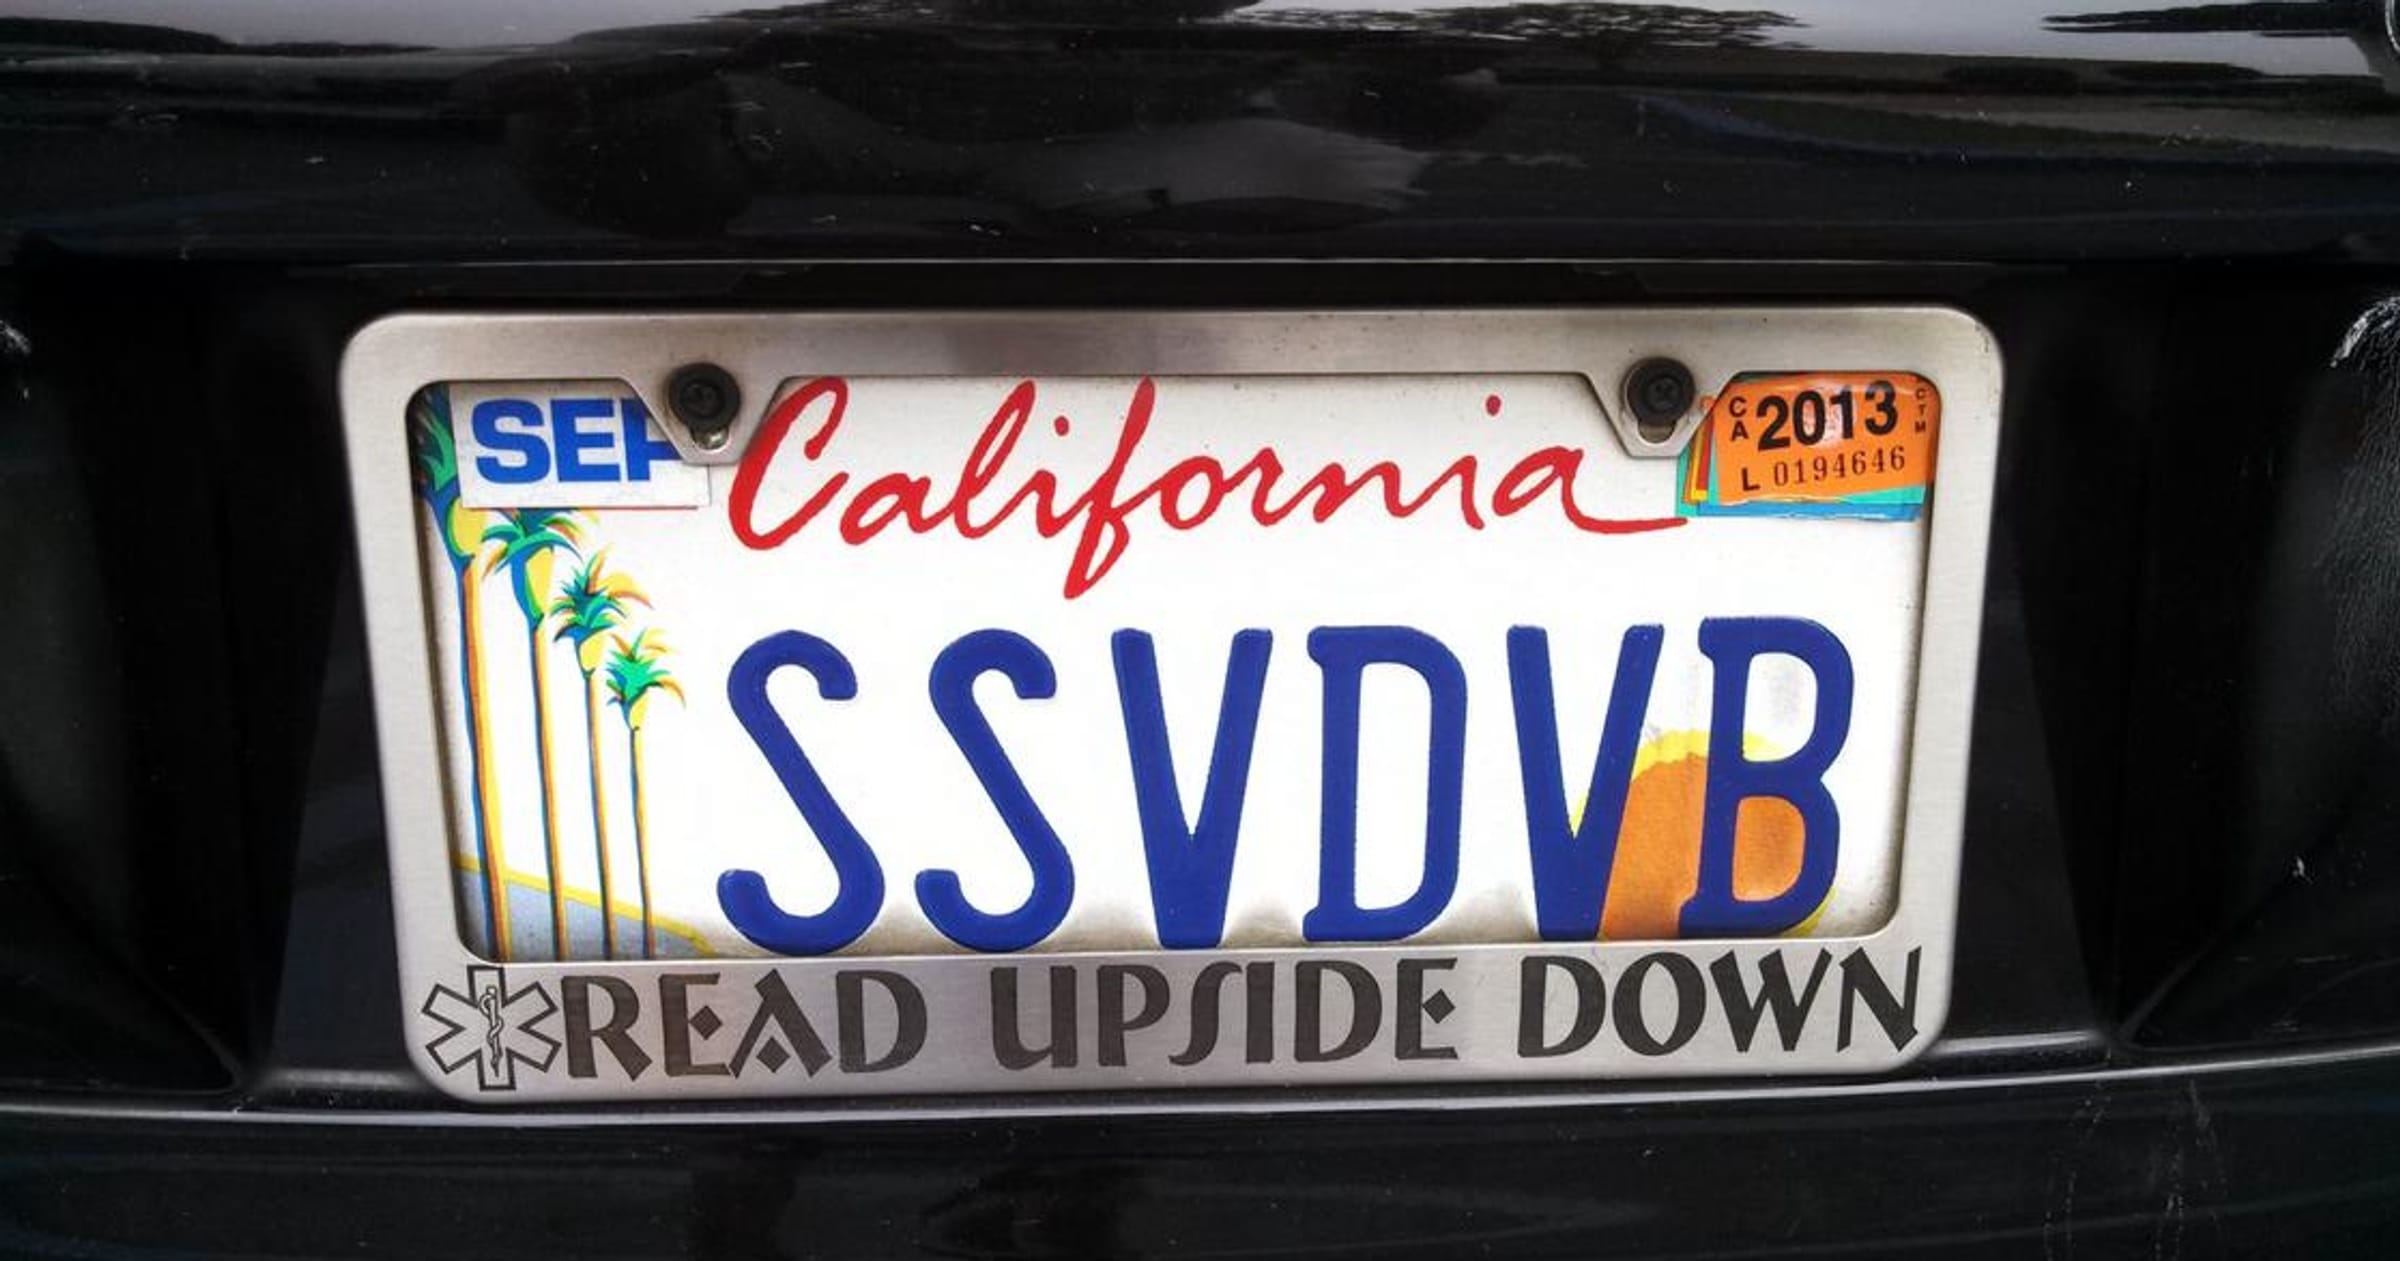 Here are the most outrageous license plates submitted to the